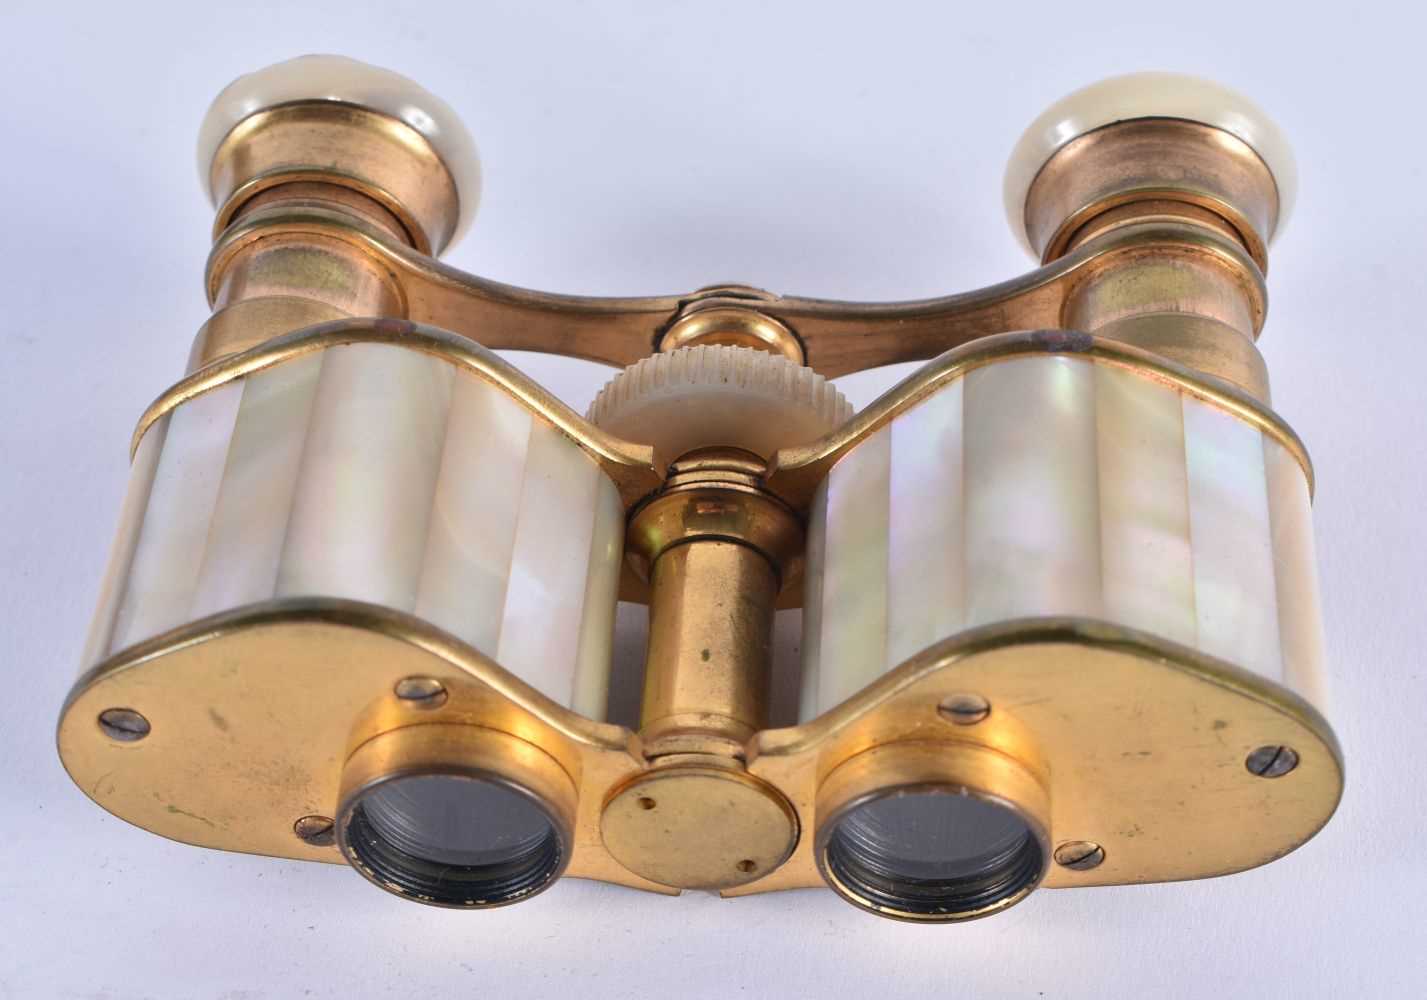 A PAIR OF MOTHER OF PEARL OPERA GLASSES. 9 cm x 8 cm extended. - Image 5 of 5